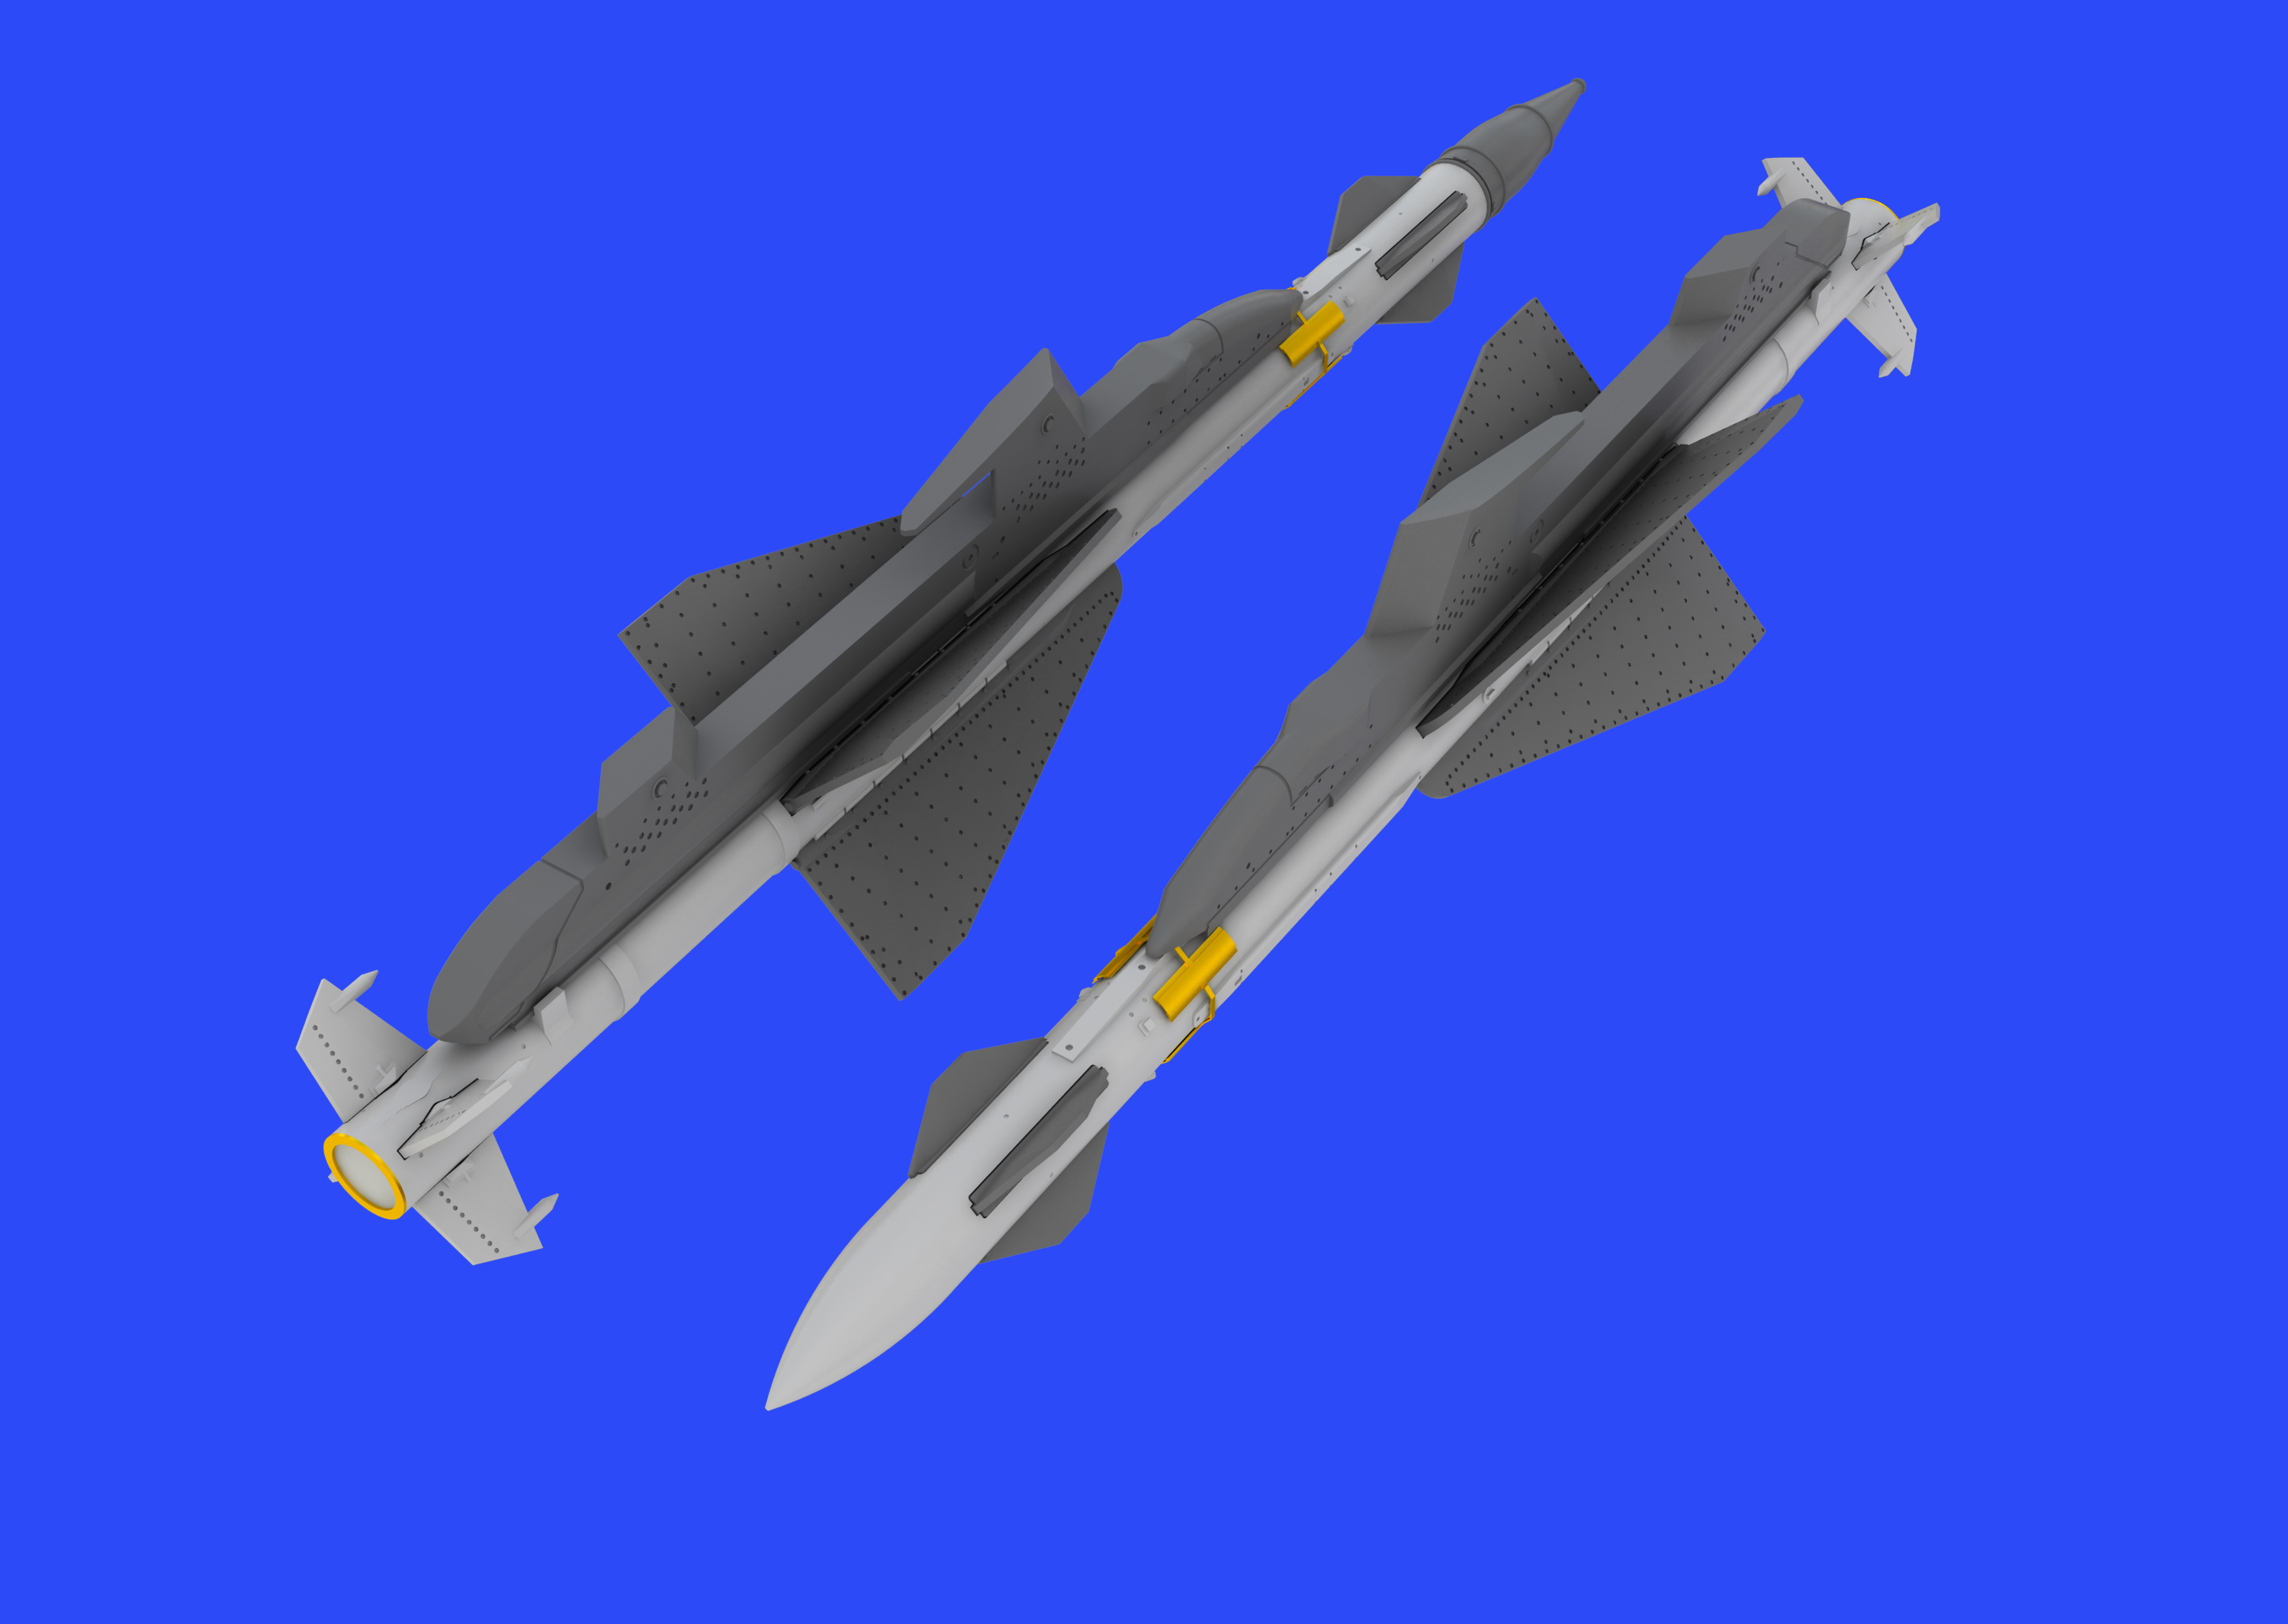 Additions (3D resin printing) 1/48 R-23R missiles for Mikoyan MiG-23 (designed to be used with Eduard kits and Trumpeter kits) 